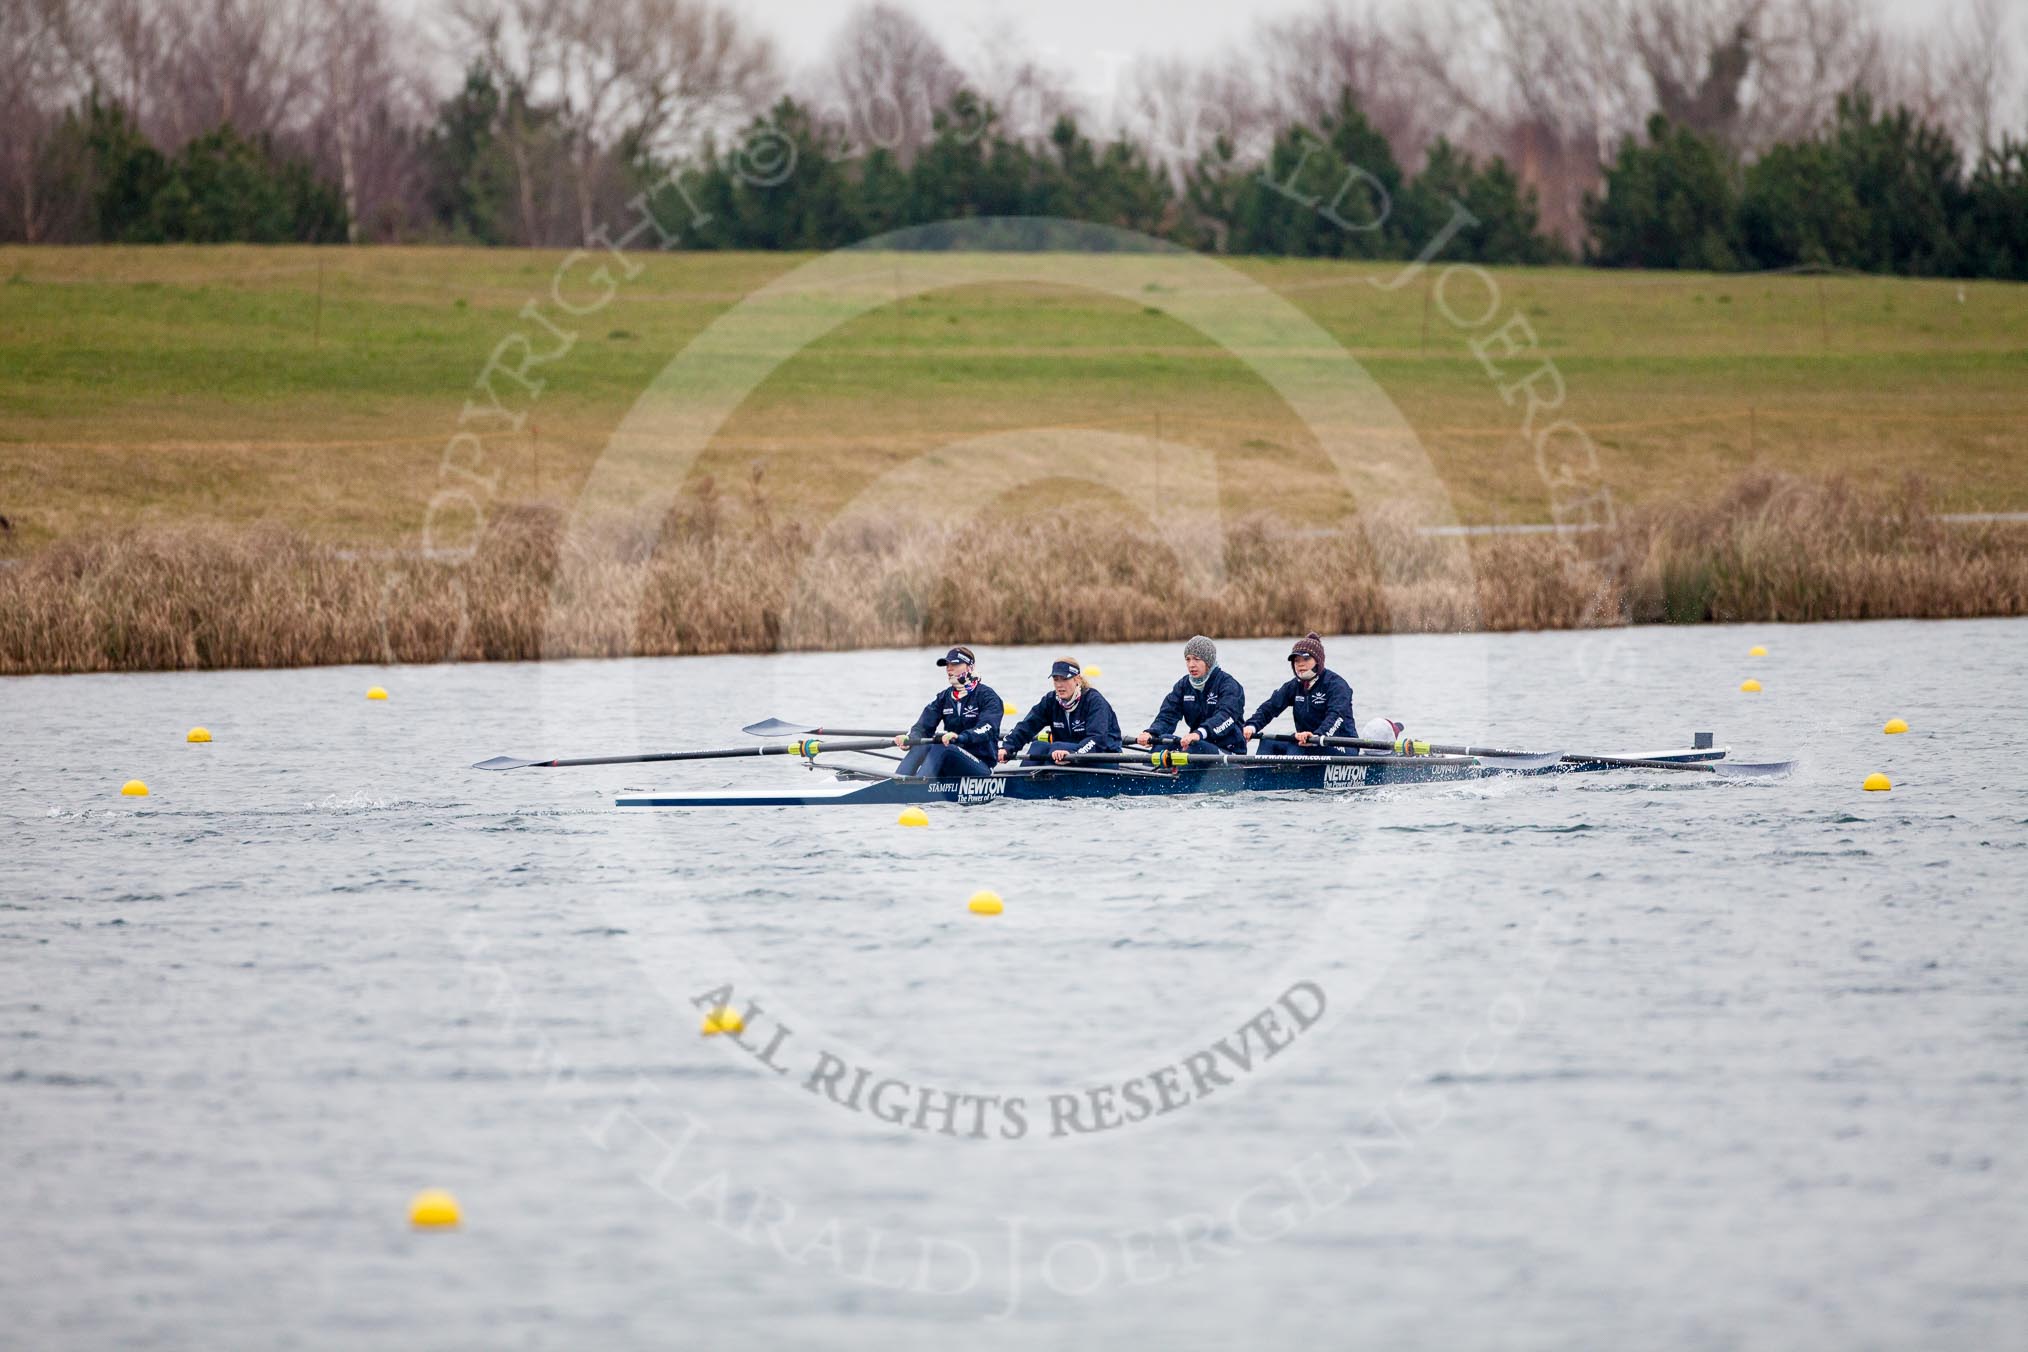 The Boat Race season 2013 - fixture OUWBC vs Molesey BC: OUWBC coxed four with stroke Hannah Ledbury , Emily Chittock, Rachel Purkess, bow Elspeth Cumber and cox Olivia Cleary,.
Dorney Lake,
Dorney, Windsor,
Berkshire,
United Kingdom,
on 24 February 2013 at 12:19, image #142